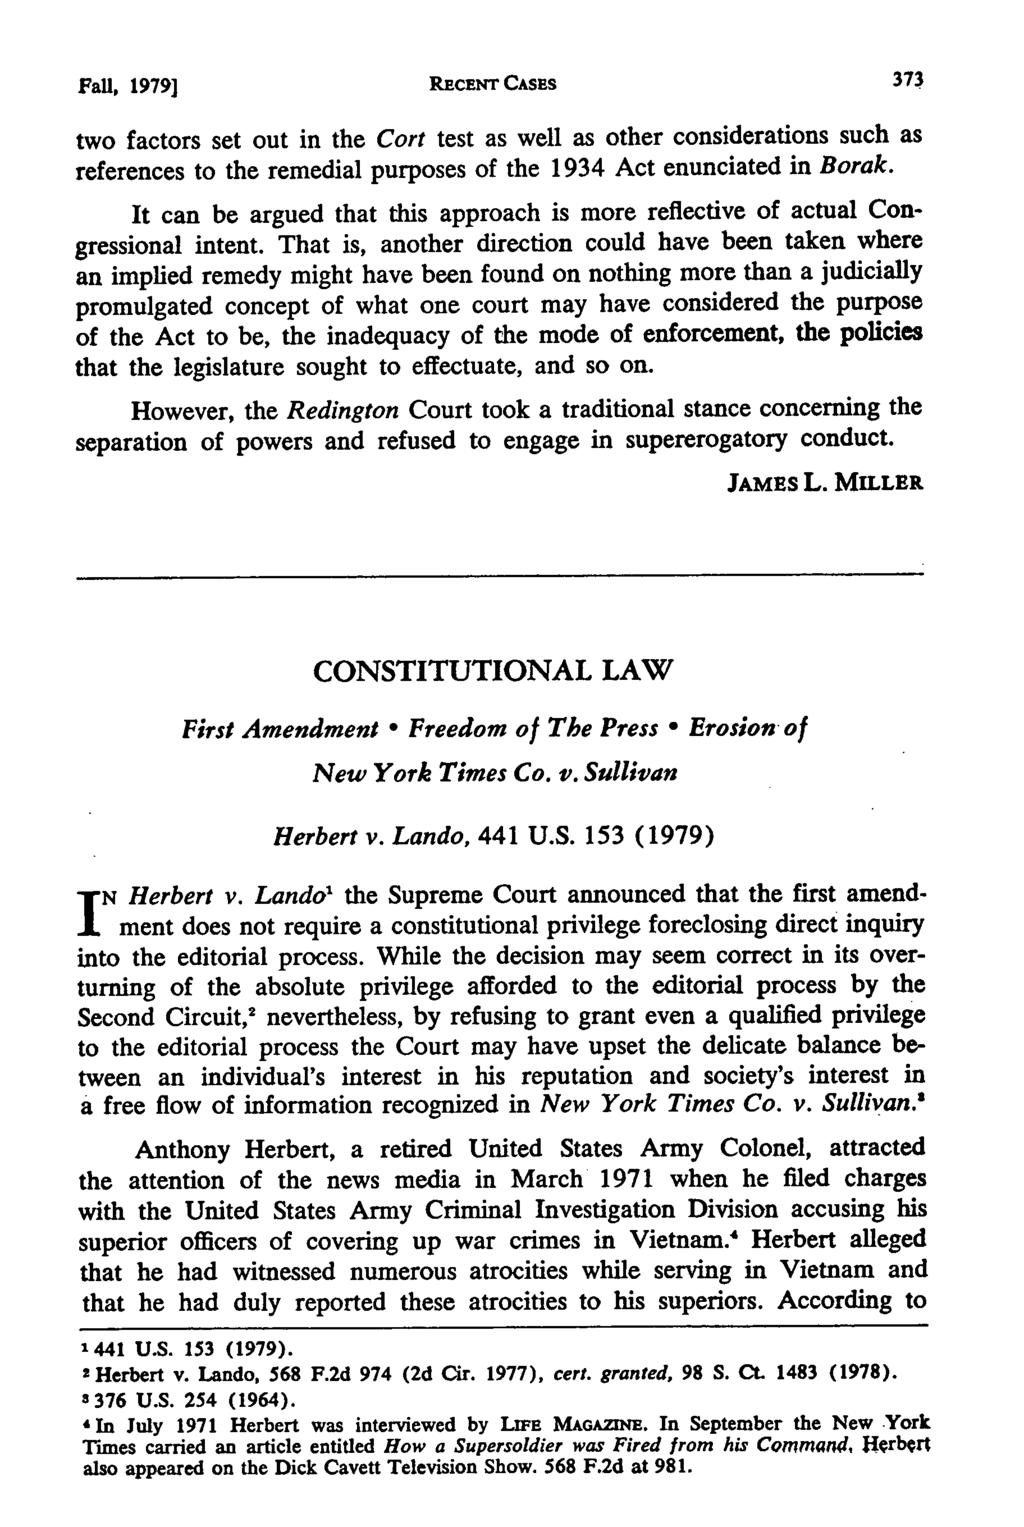 Fall, 1979] RECENT CASES two factors set out in the Cort test as well as other considerations such as references to the remedial purposes of the 1934 Act enunciated in Borak.